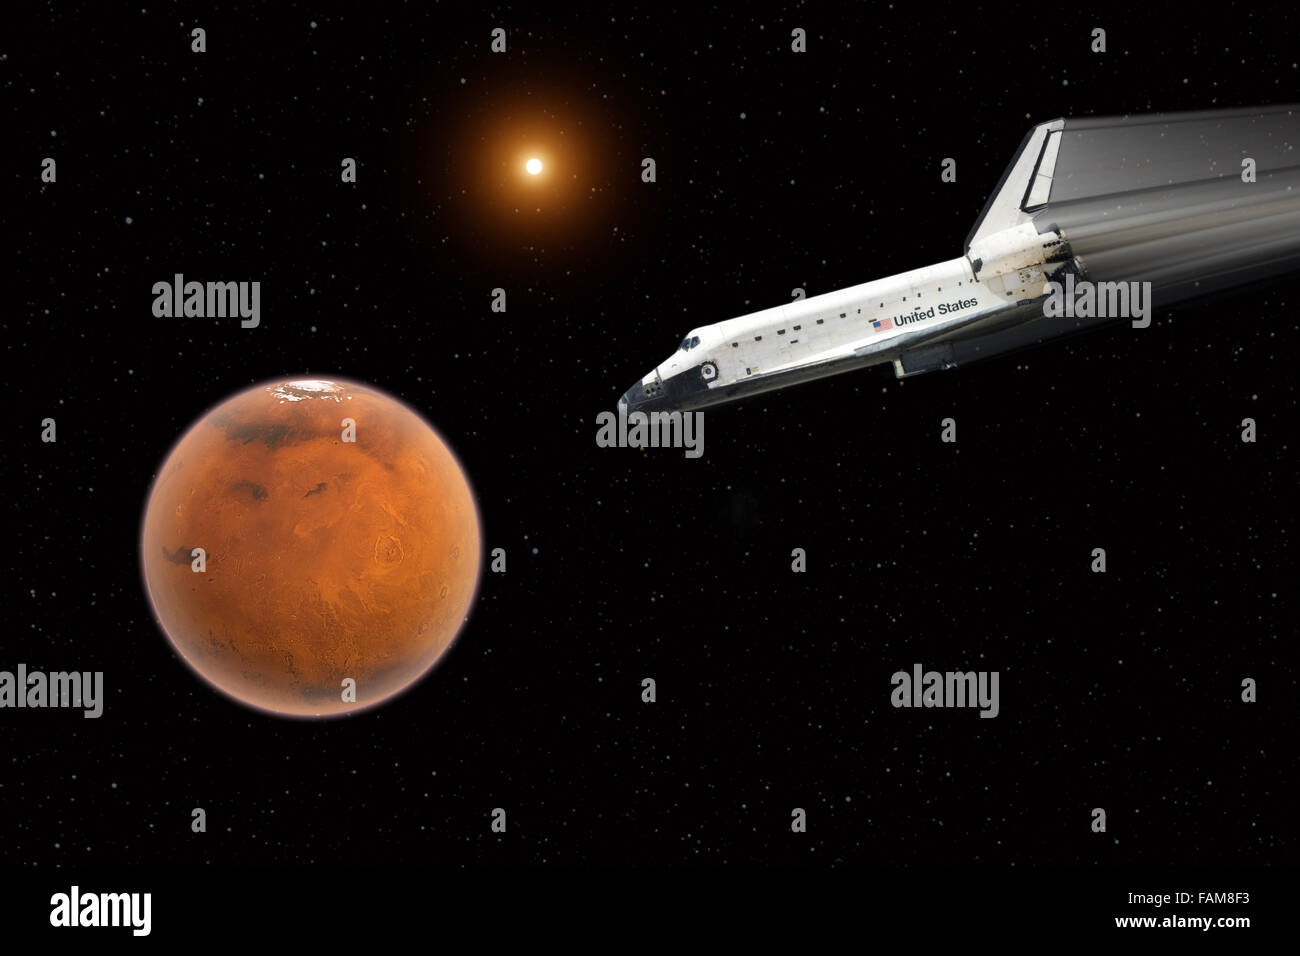 Space shuttle on way to Mars - Elements of this image furnished by NASA Stock Photo